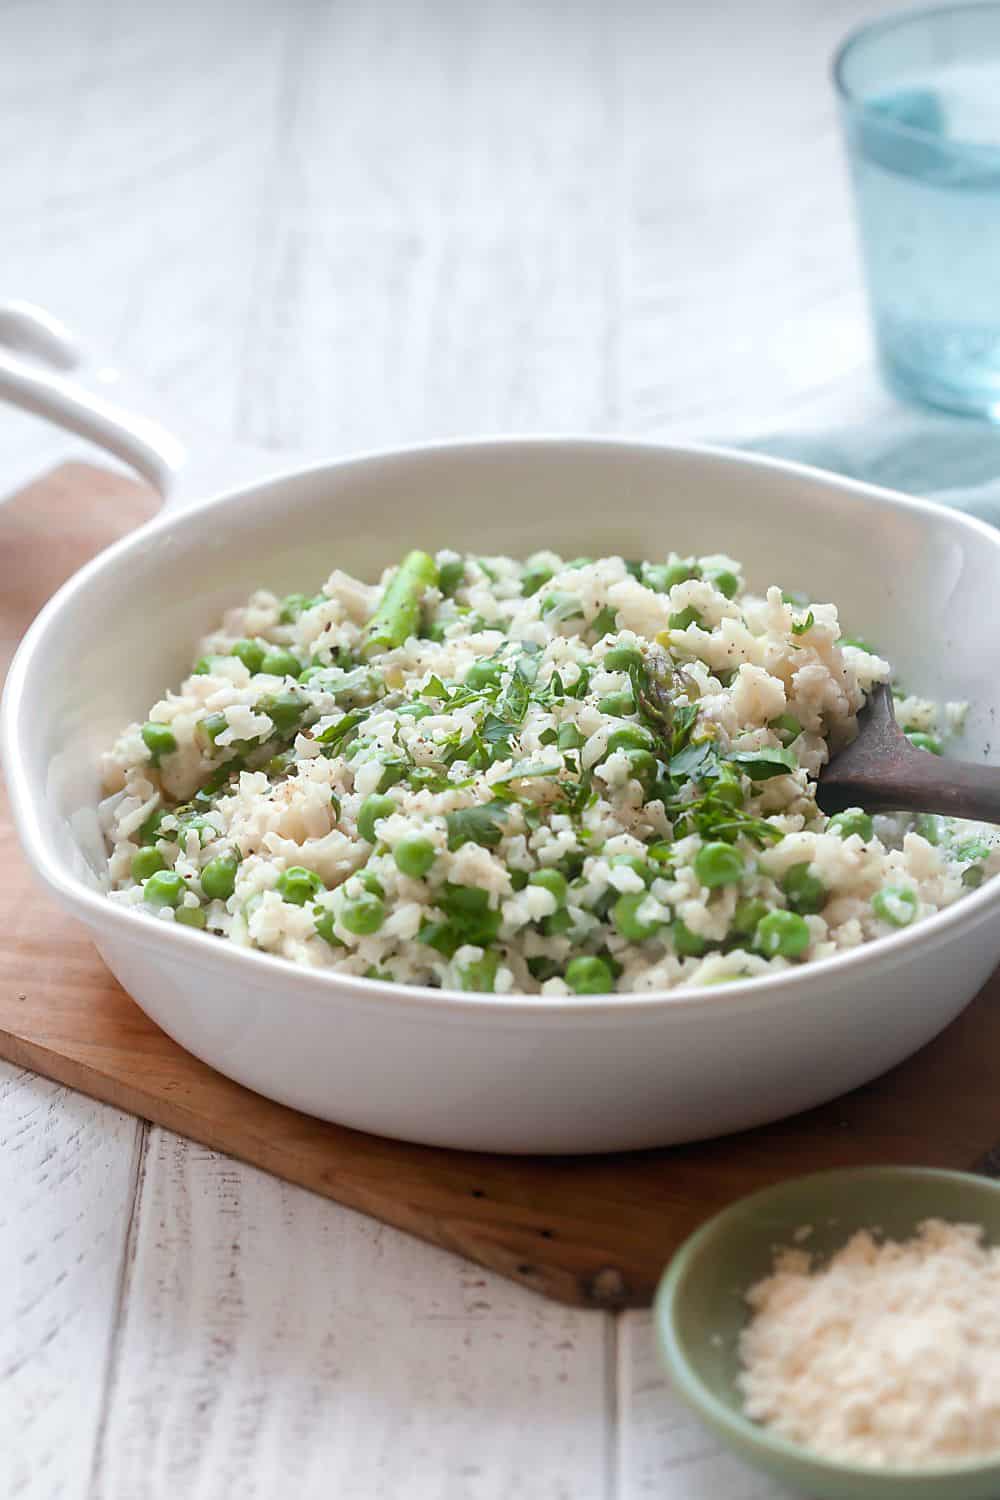 Cauliflower Rice "Risotto" with Peas and Asparagus